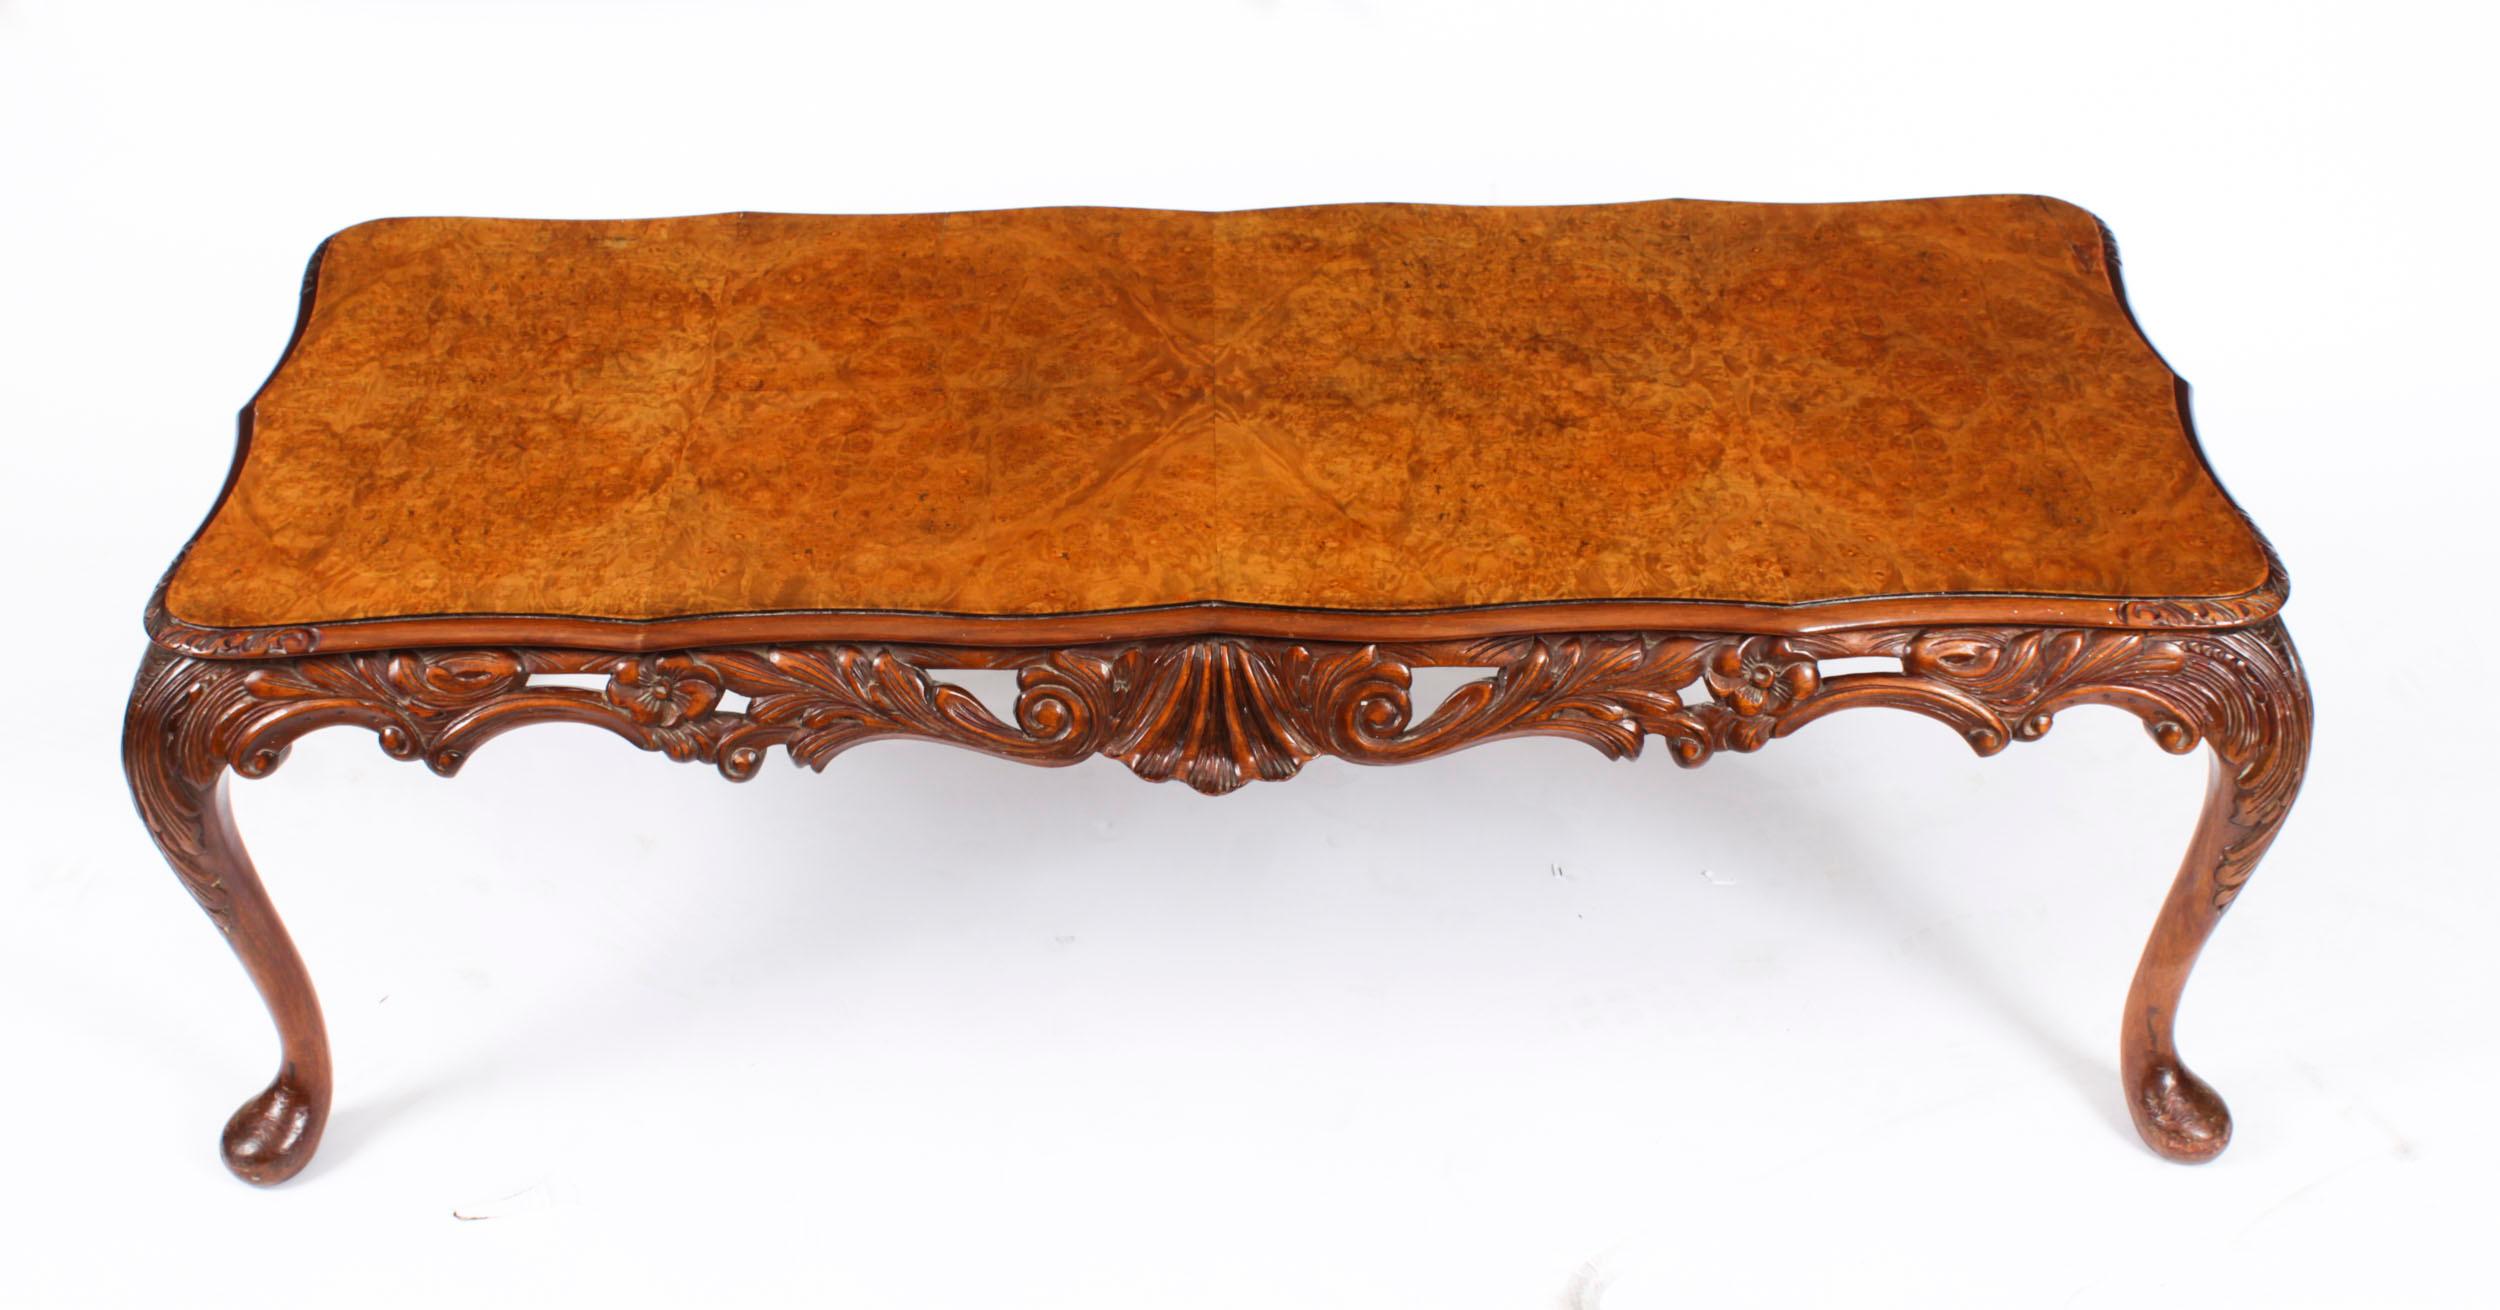 This is a stunningly beautiful English antique   burr walnut coffee table,  with a beautiful shaped top, circa 1920 in date.  

It features a shaped top with a fabulous hand carved edge.

The shaped carved frieze standing on well carved solid walnut